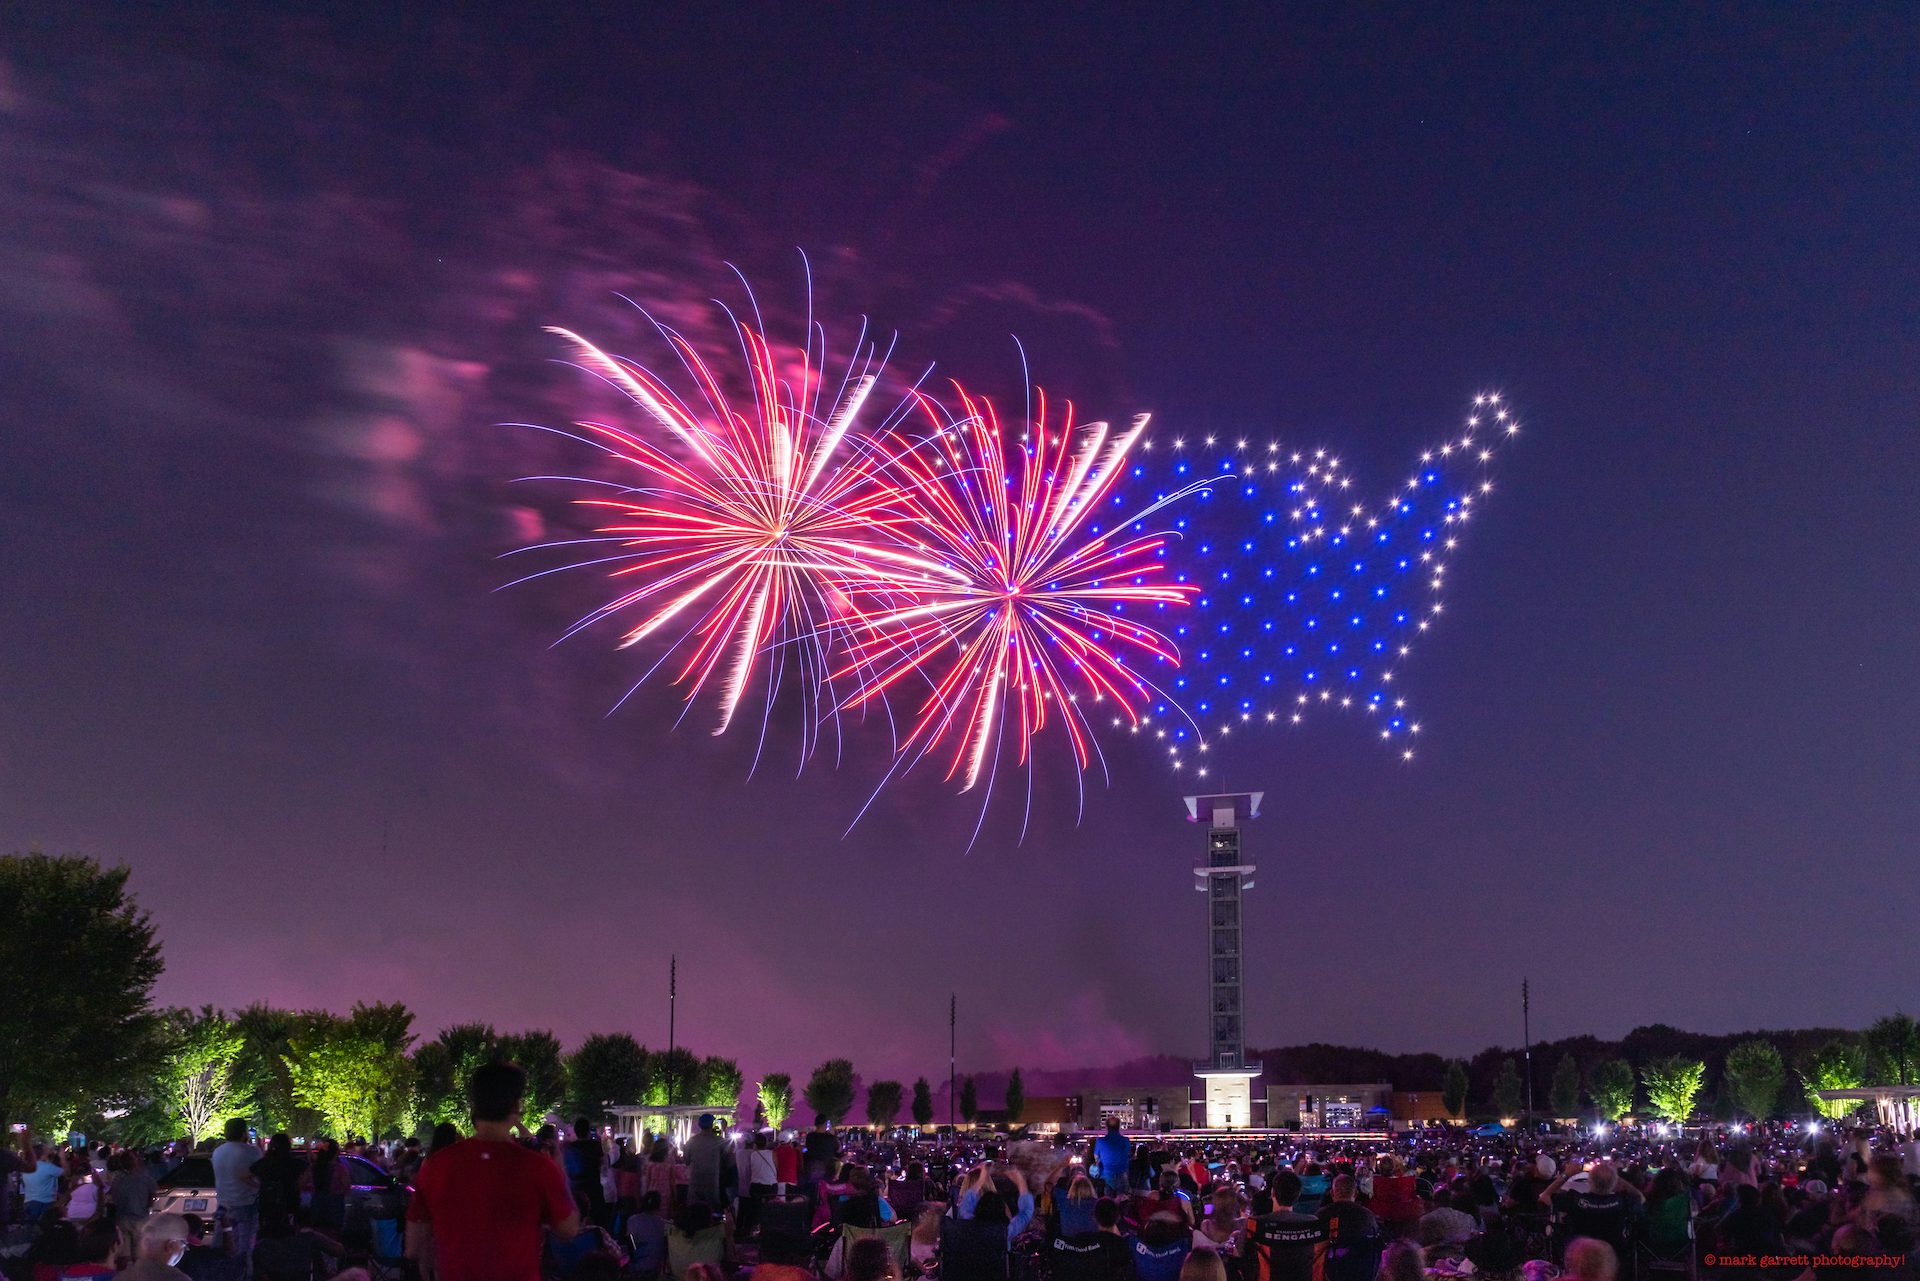 Verge Aero flies one of three drone shows on the 4th of July in Blue Ash, OH. This Independance Day light display incorperated drones and fireworks.